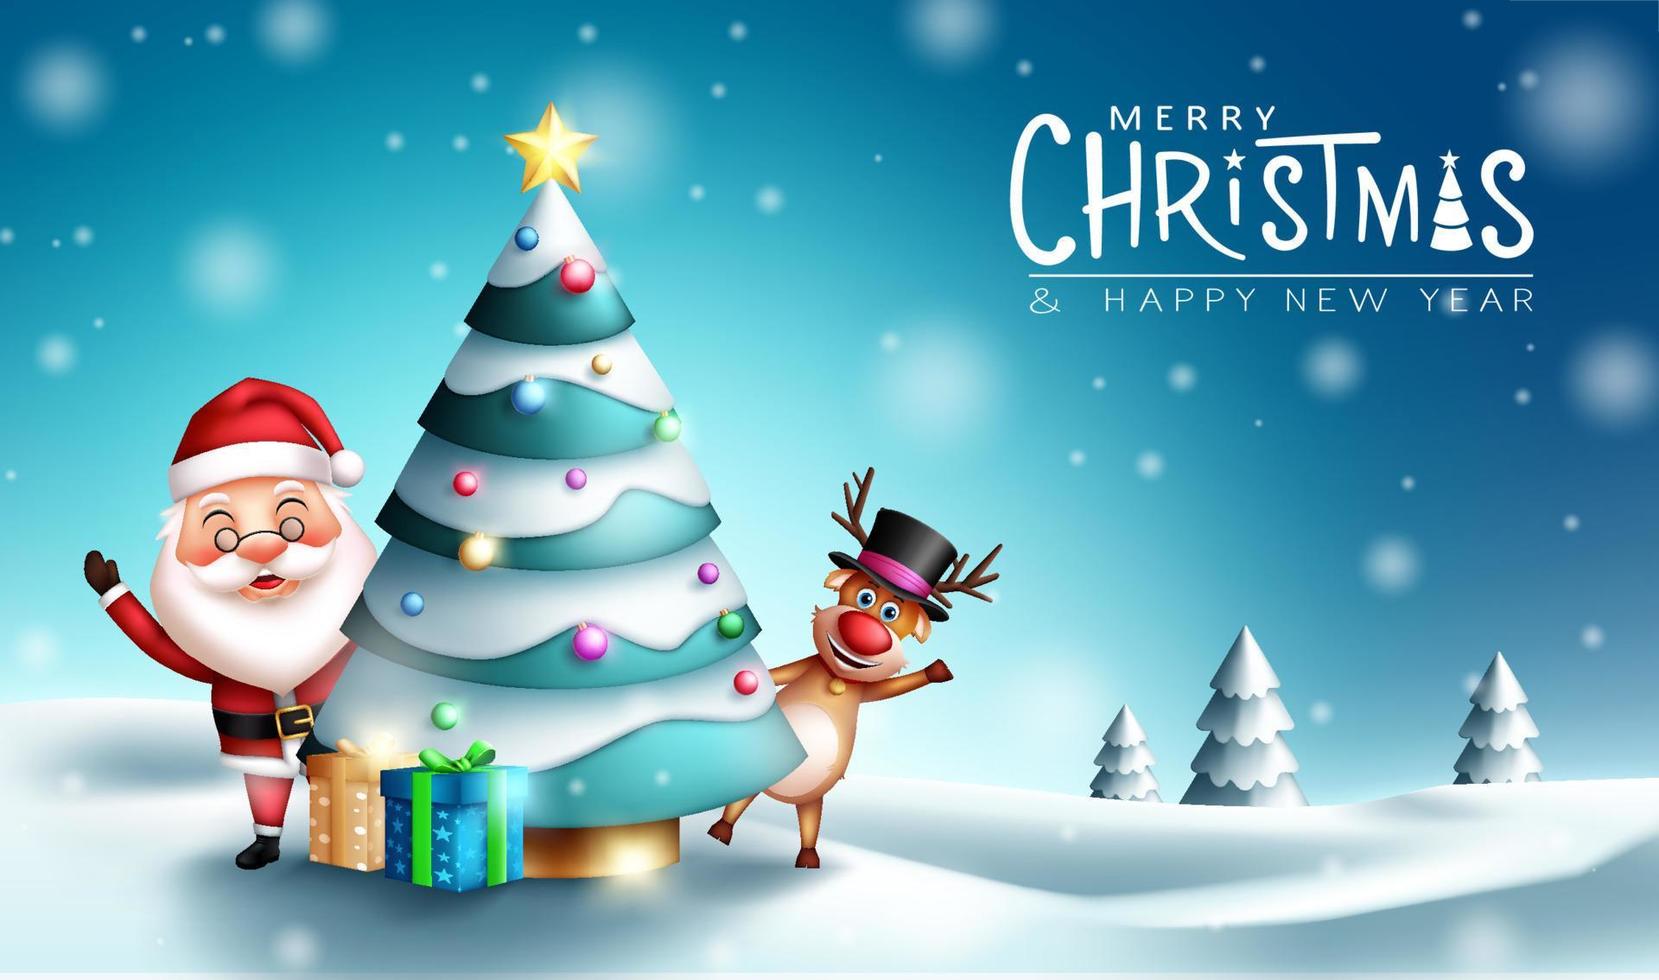 Christmas characters vector design. Merry christmas greeting text with santa claus and reindeer character waving behind xmas tree for outdoor snowy holiday season. Vector illustration